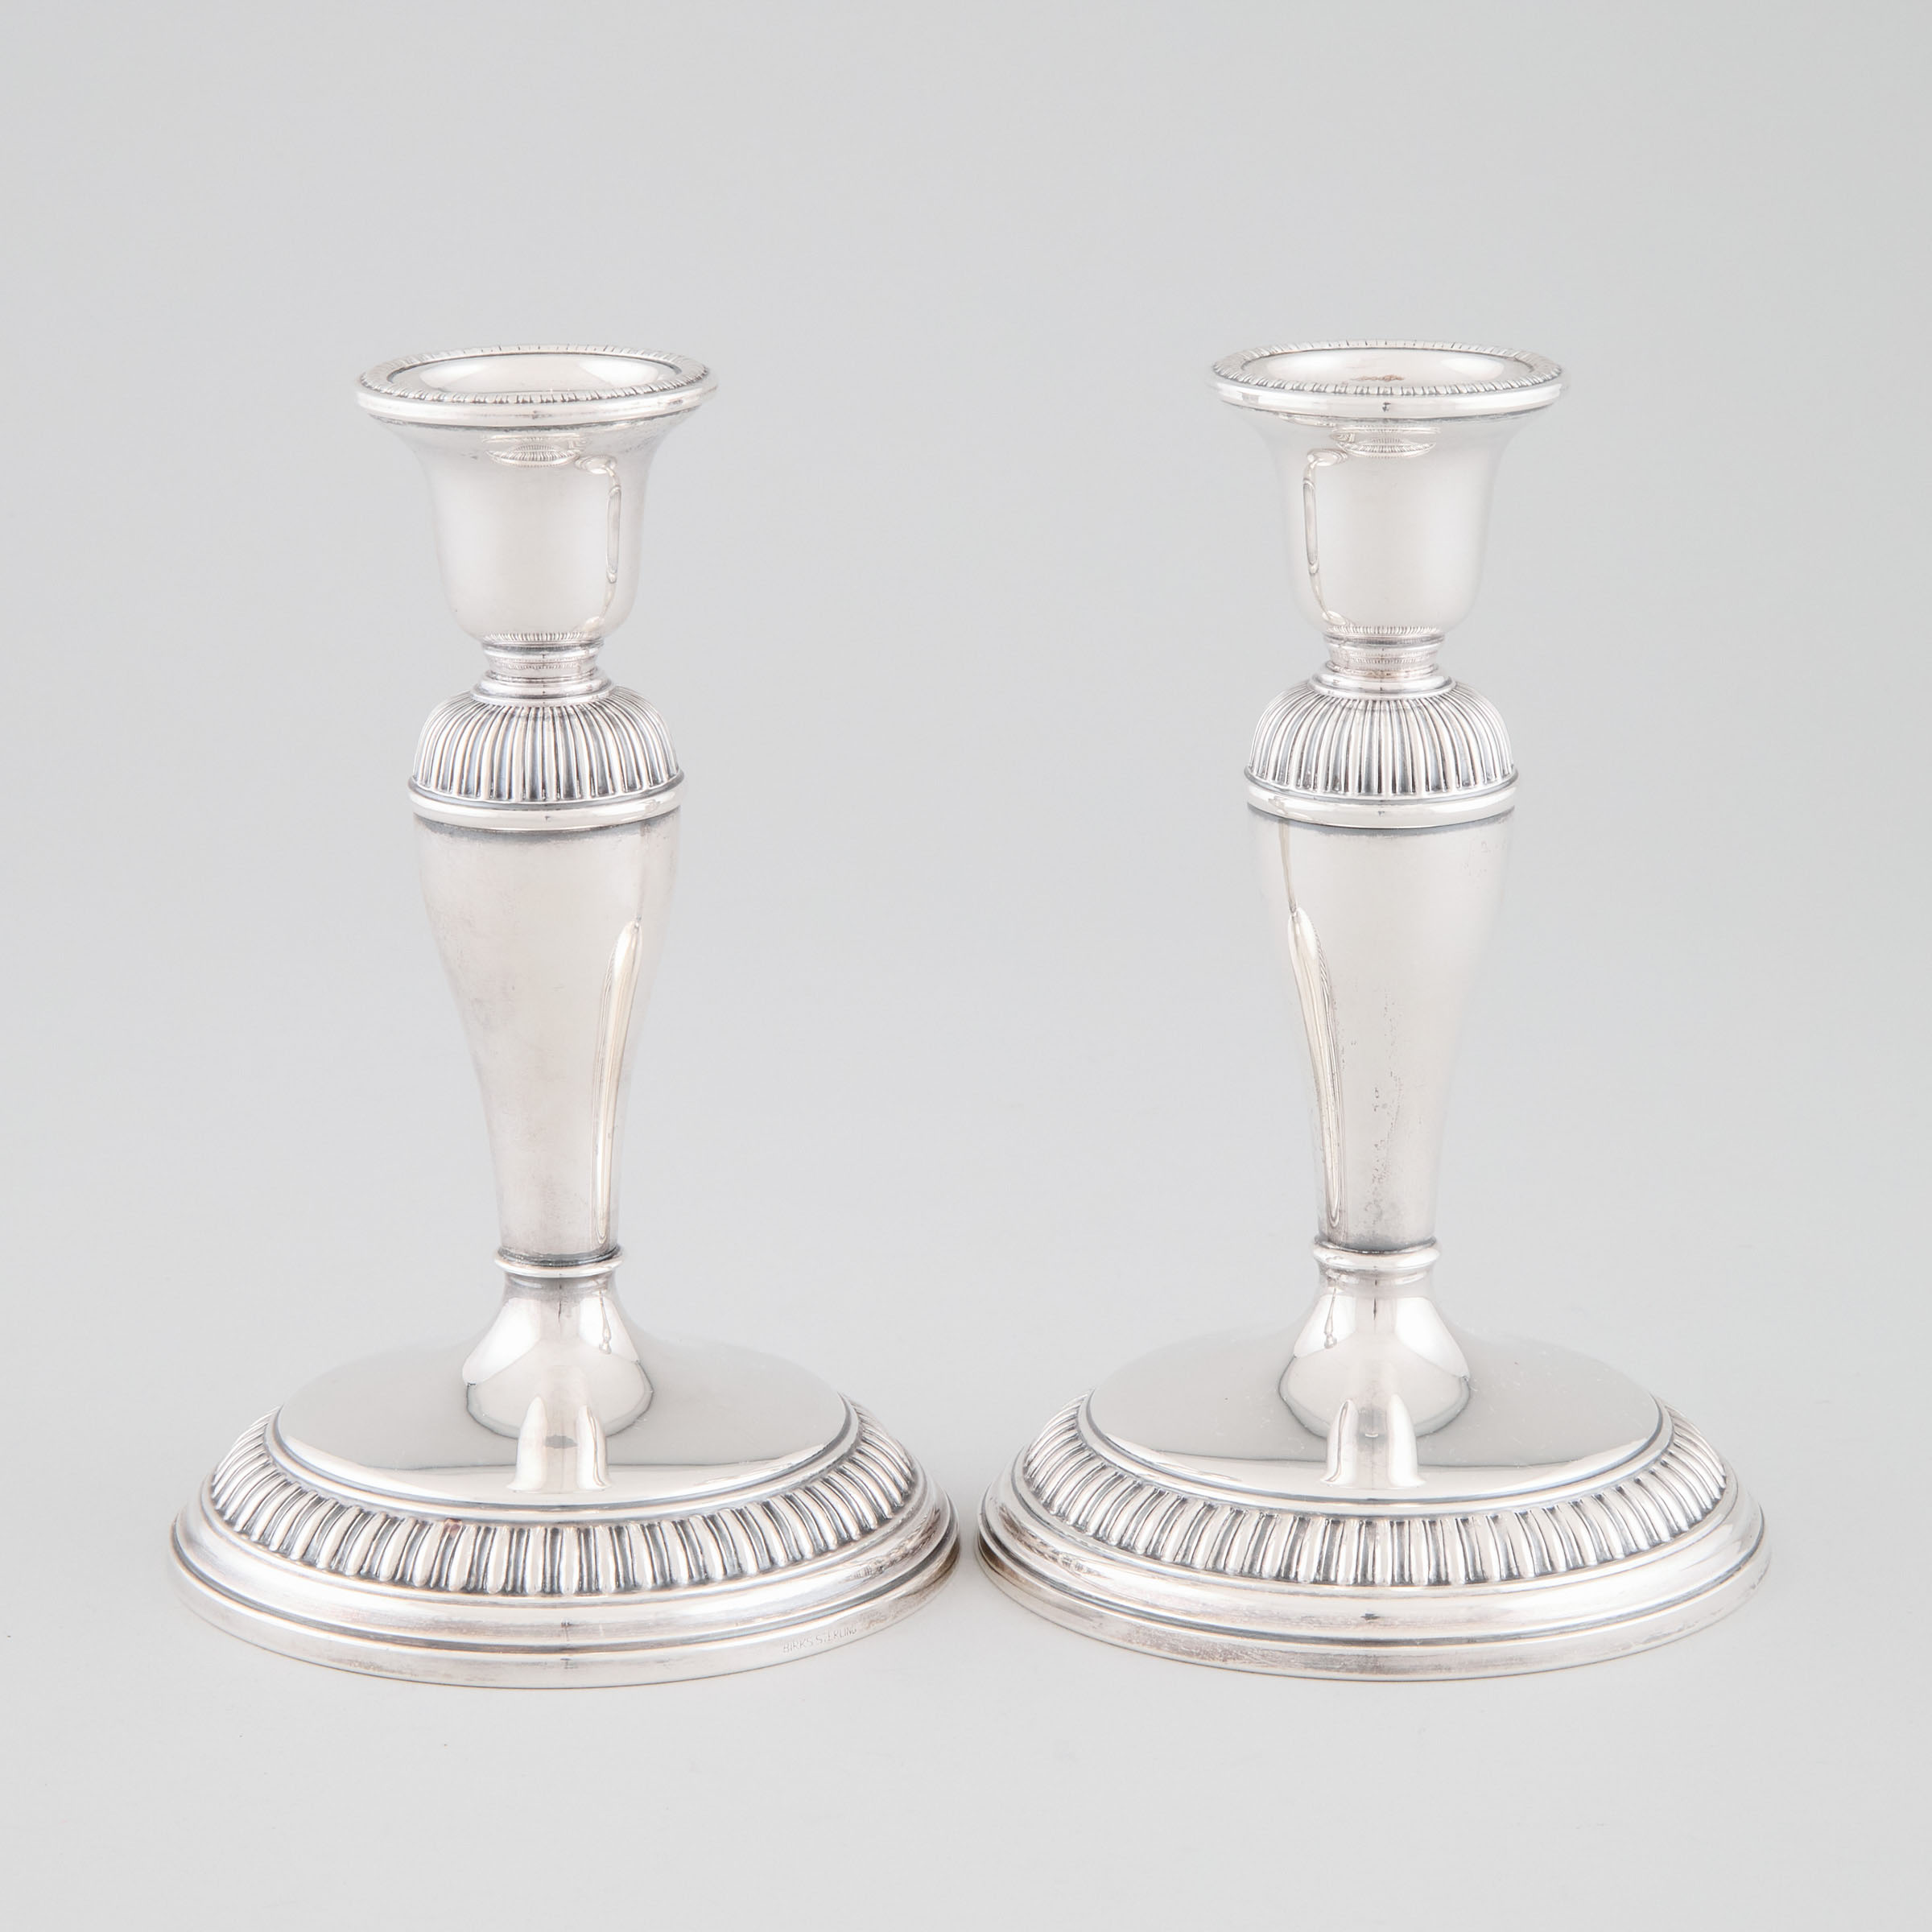 Pair of Canadian Silver Table Candlesticks,